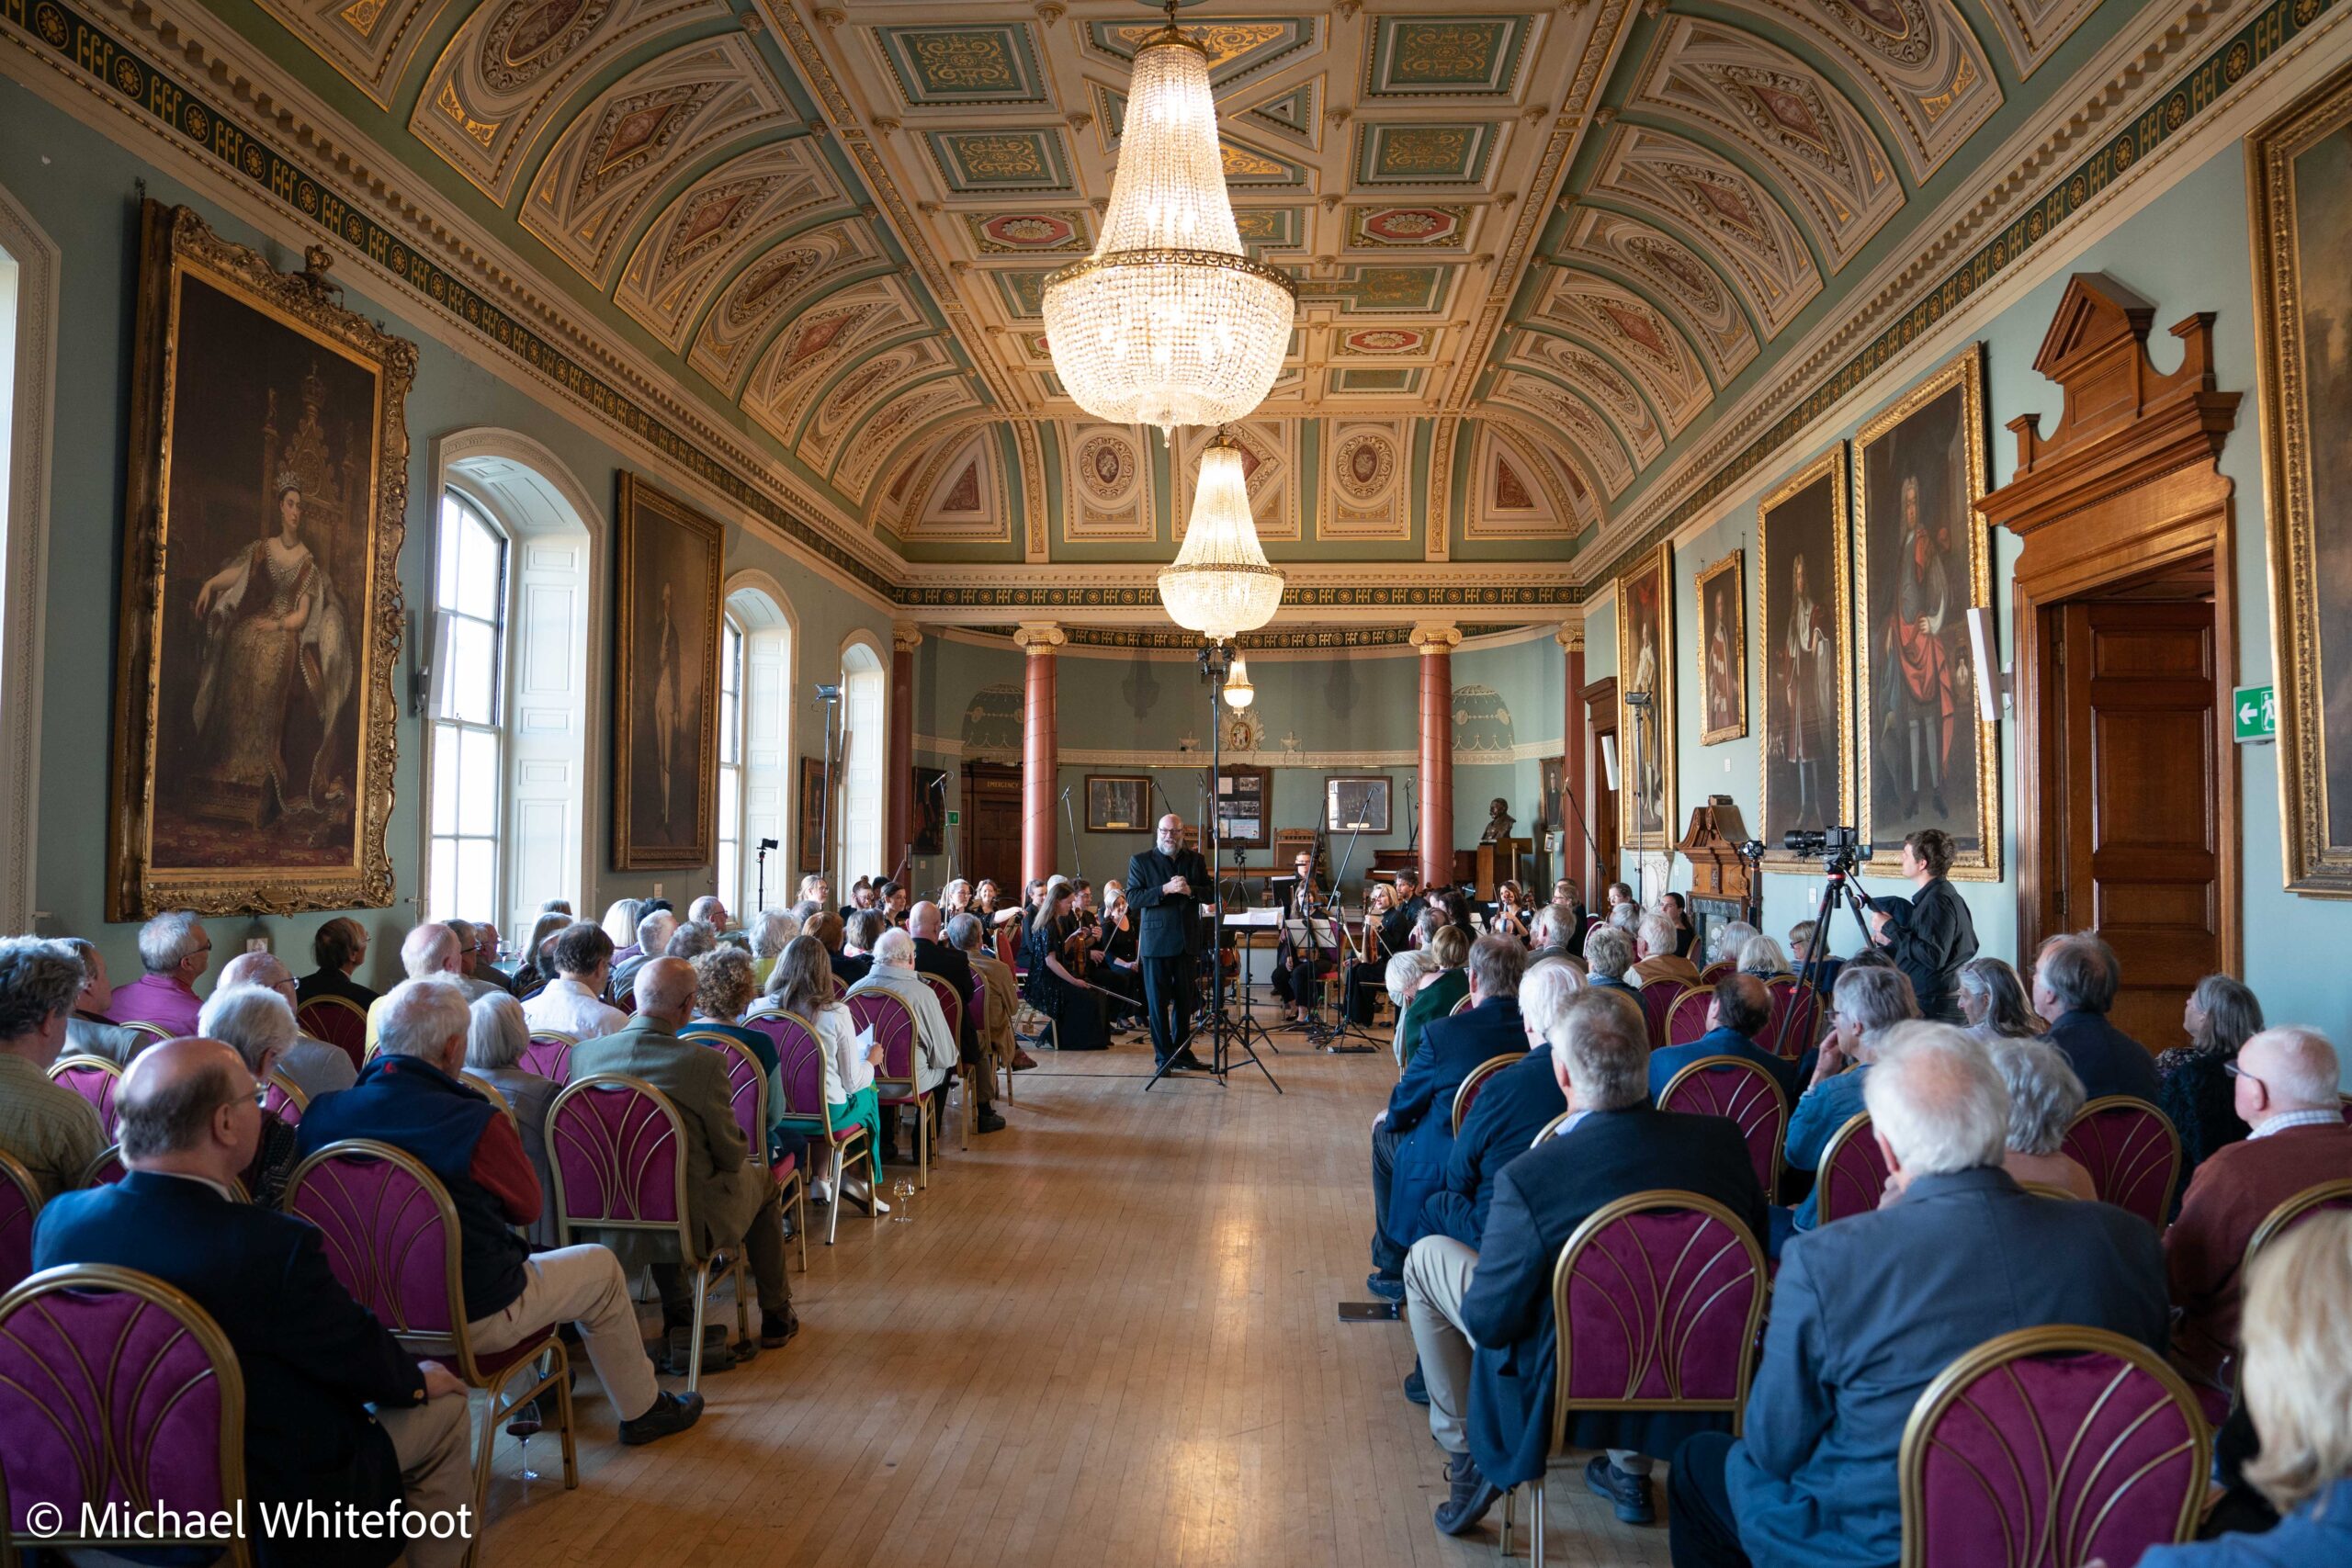 Friday 31 May at 7:00pm - Elgar's Strings: Elgar's Wartime Masterpiece at Worcester Guildhall